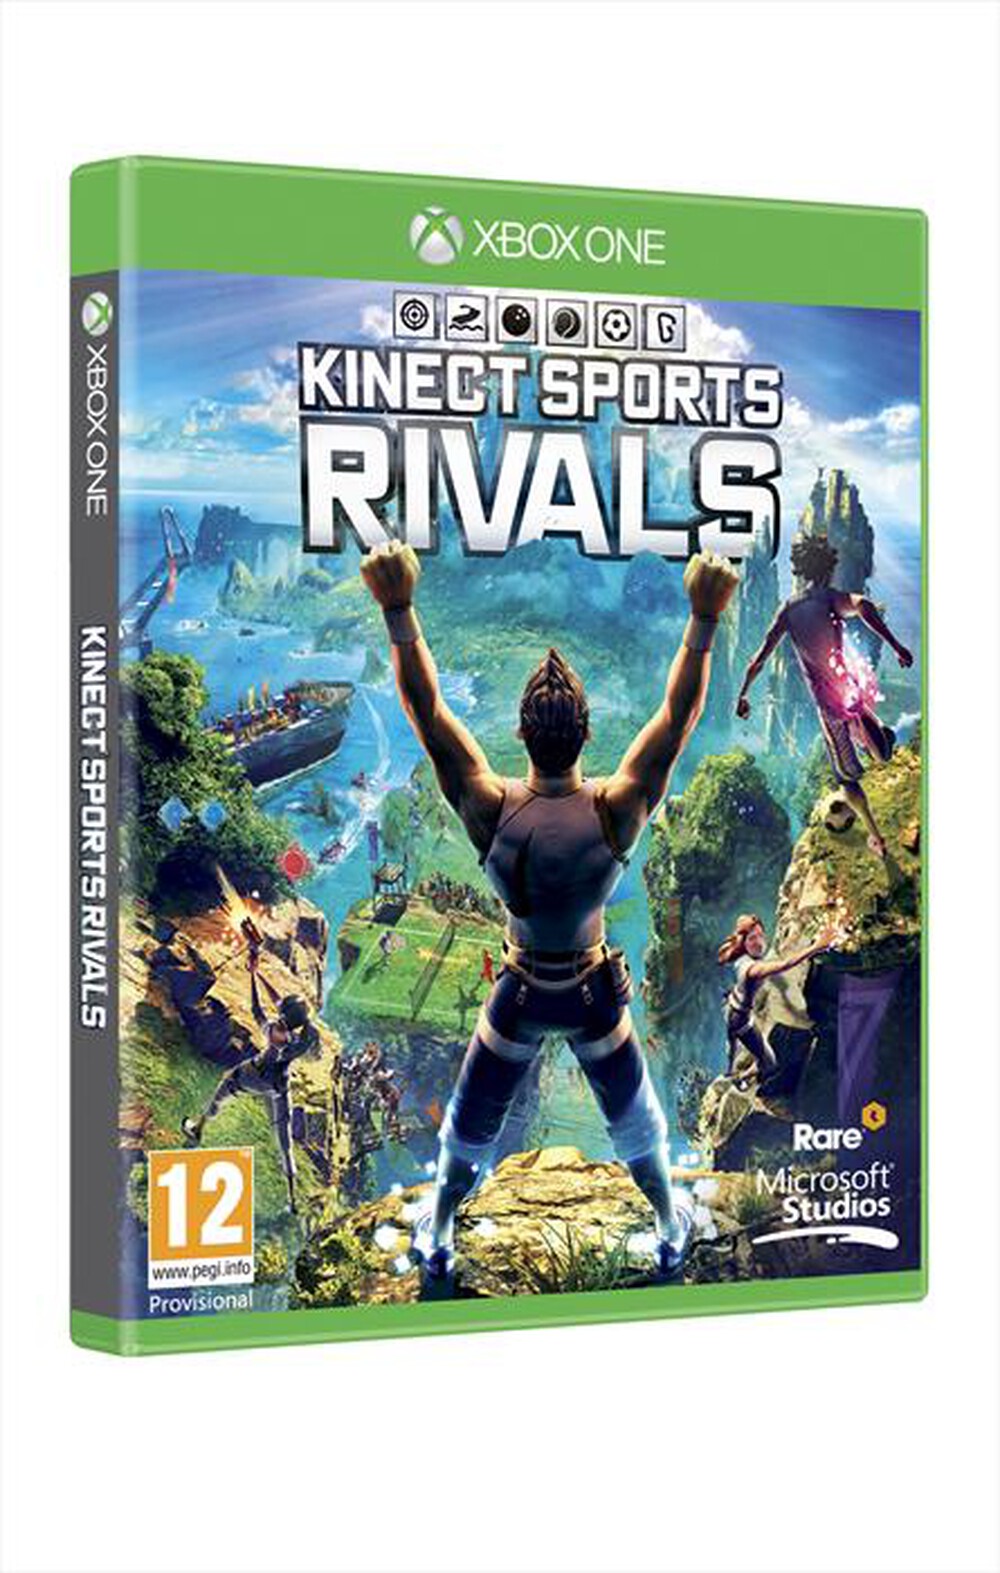 "MICROSOFT - Kinect Sports Rivals Xbox One"